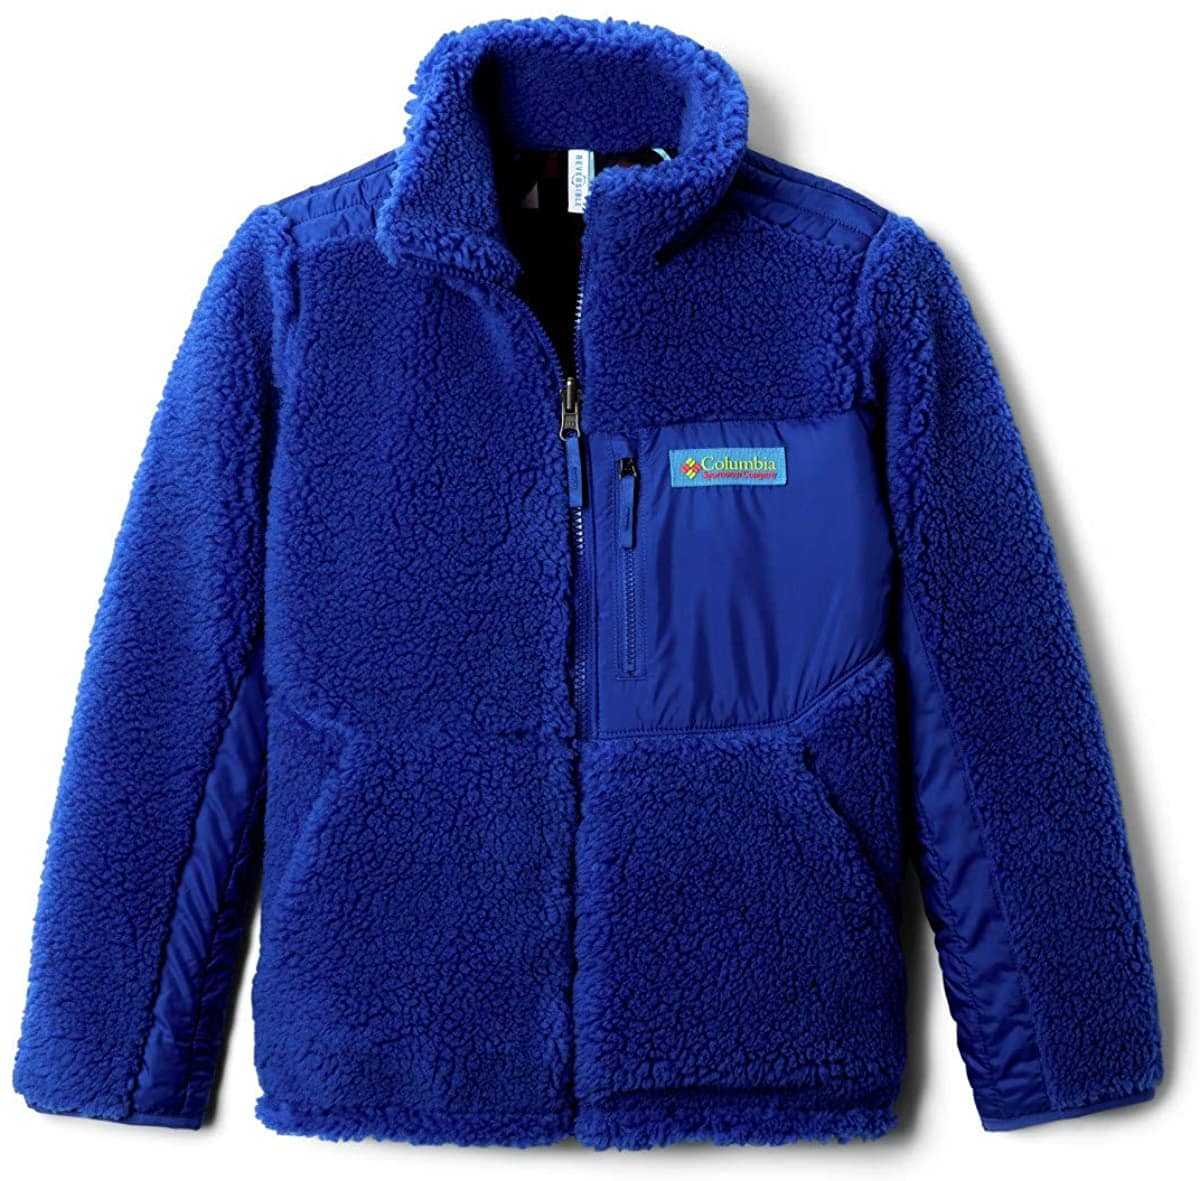 The Archer Ridge is a Sherpa fleece jacket on one side and a windbreaker on the other